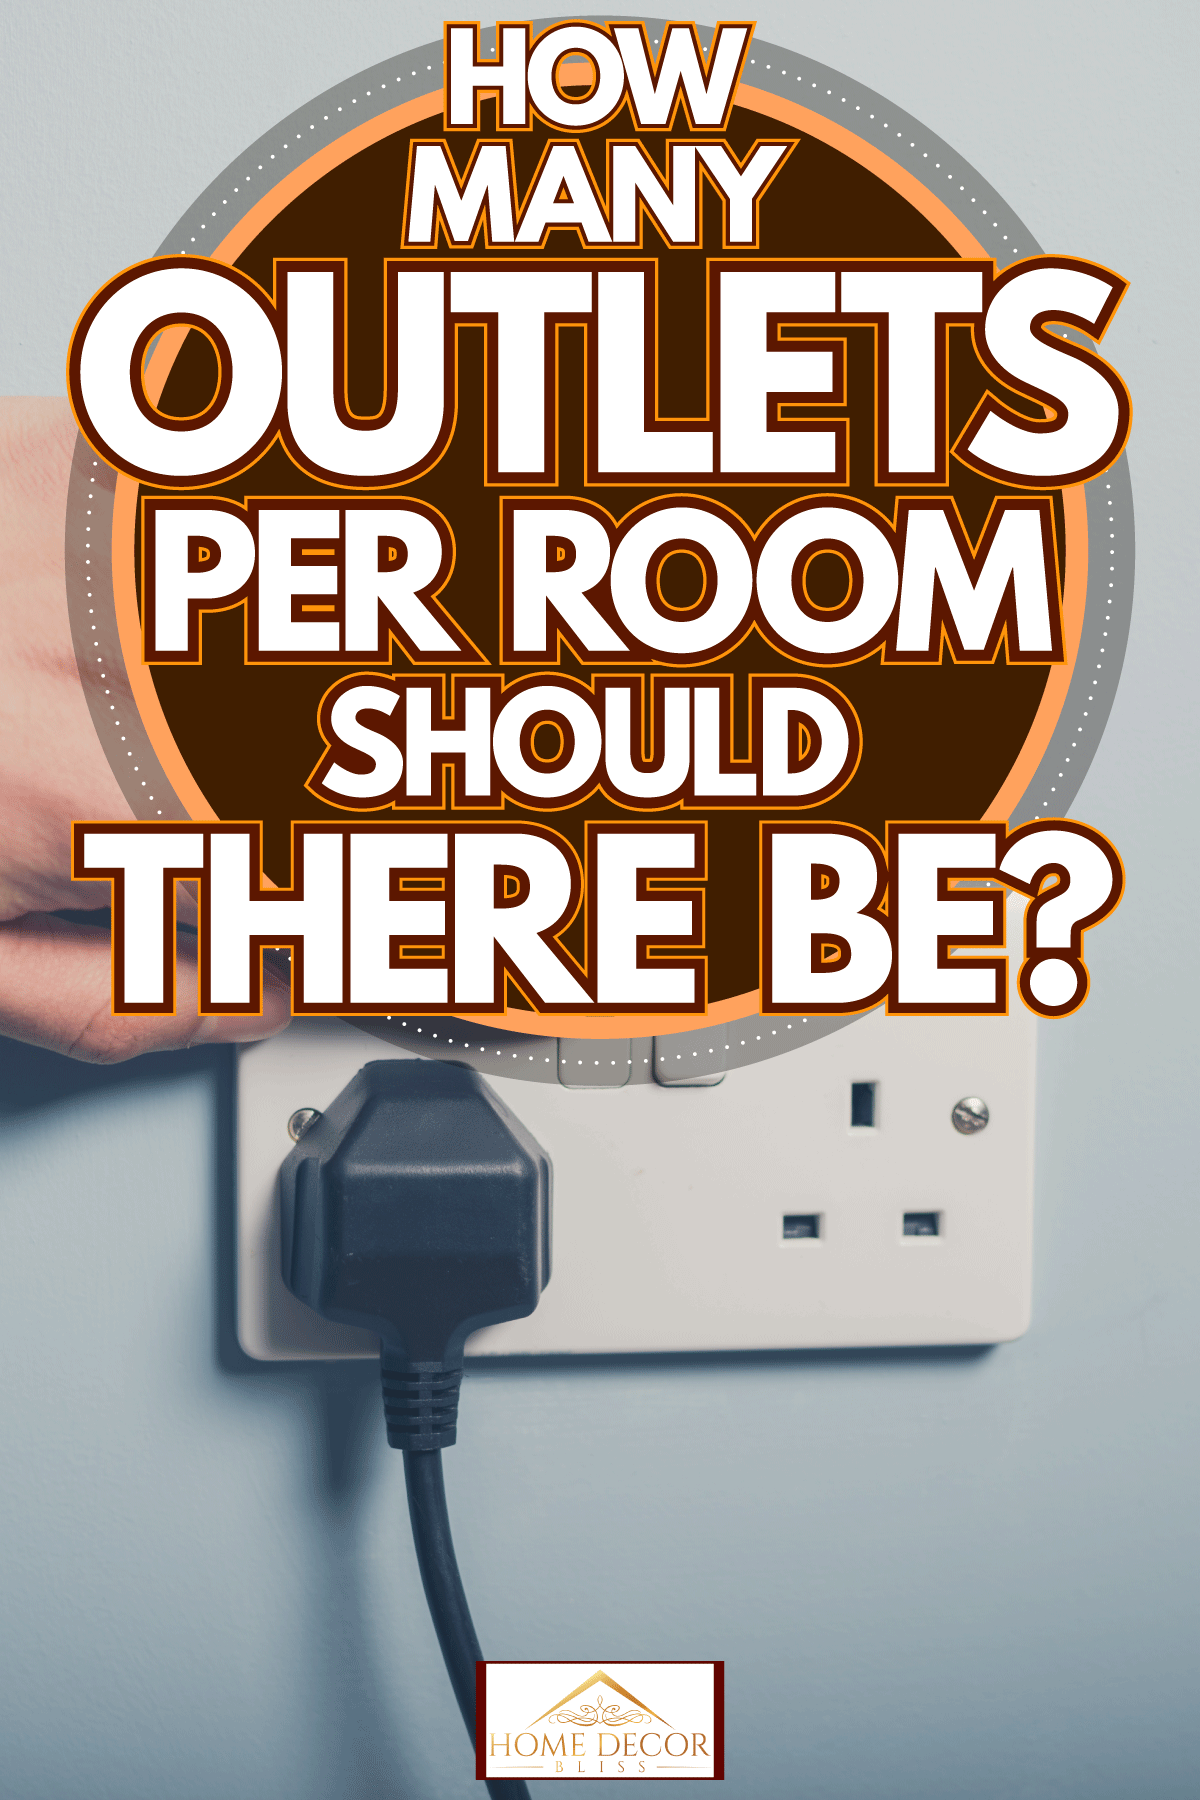 Turning on the switch next to a plug socket, How Many Outlets Per Room Should There Be?